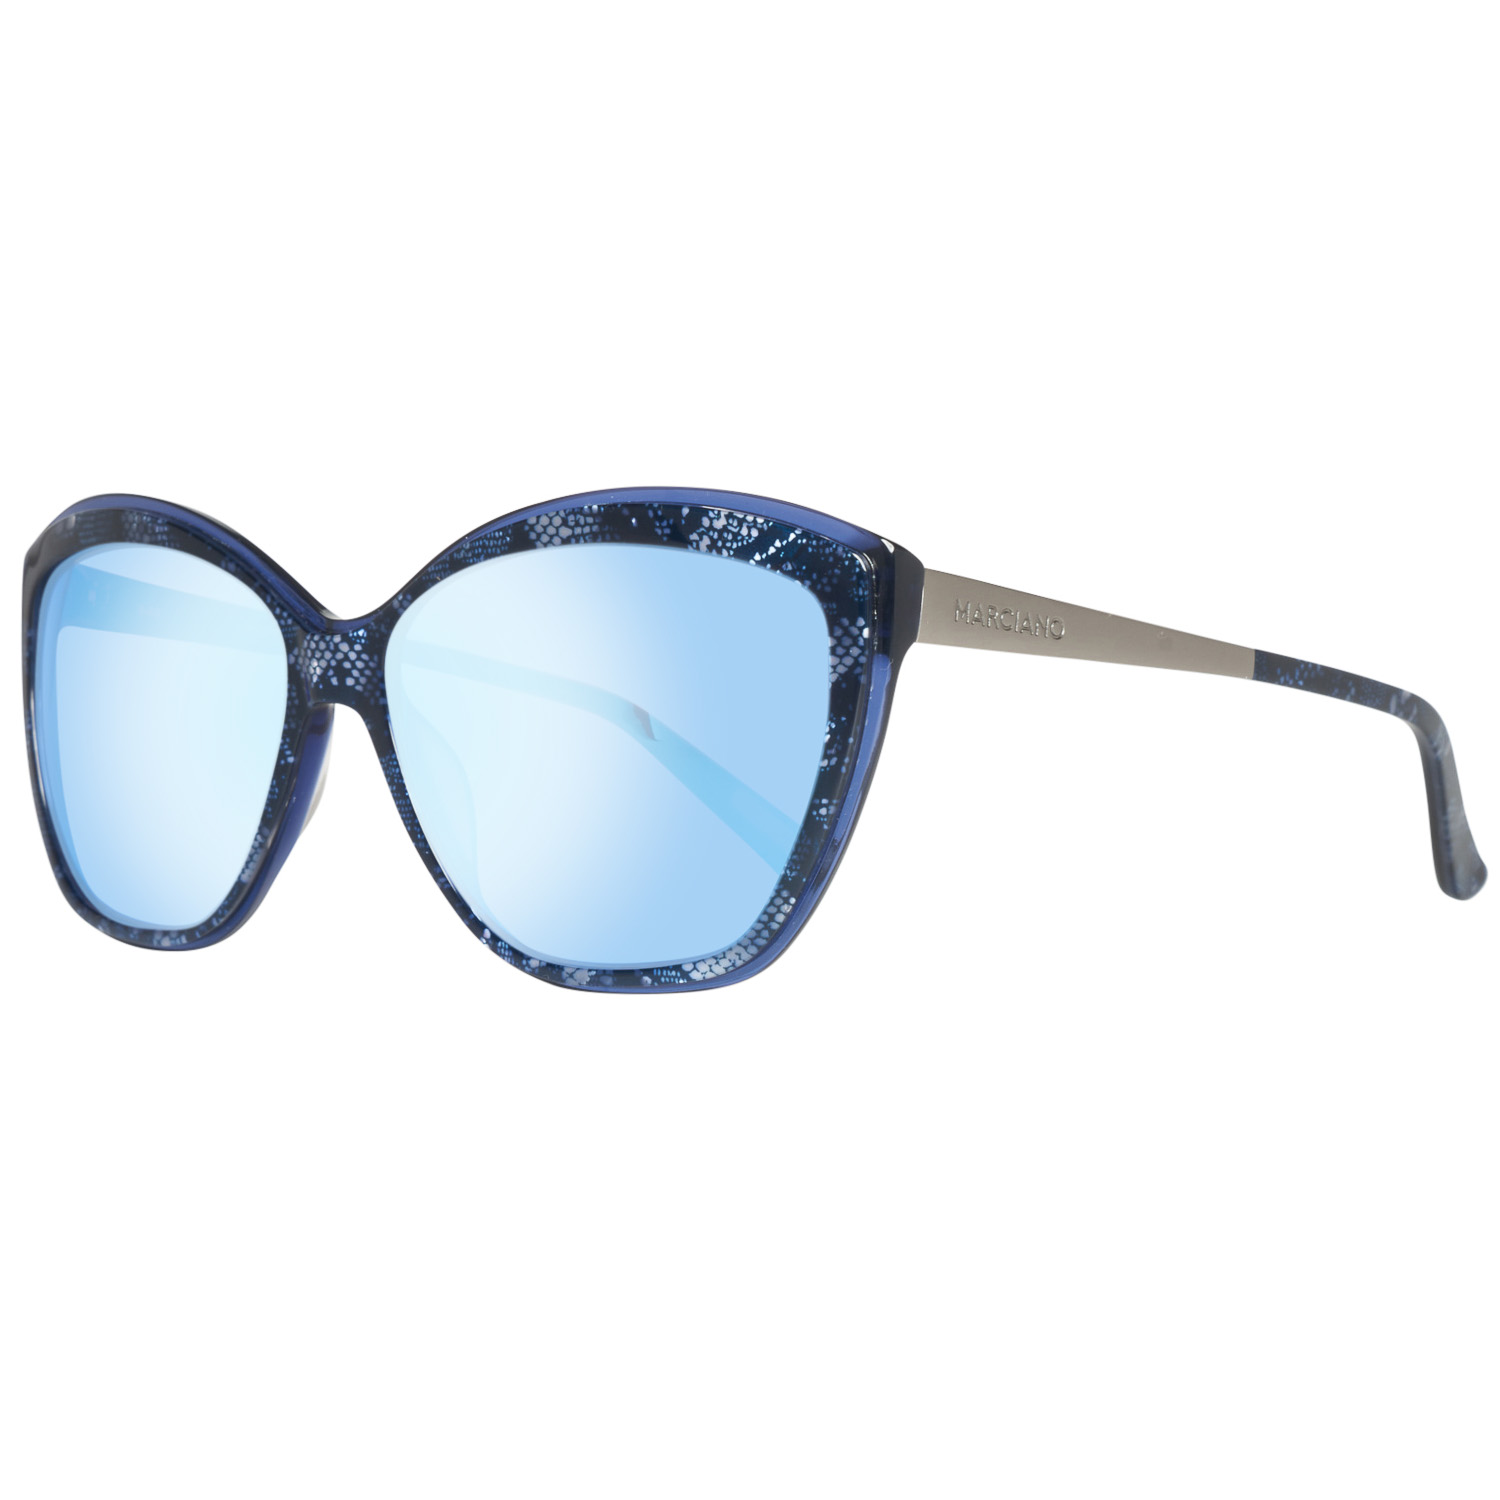 Guess By Marciano Sunglasses GM0738 92X 59 Blue